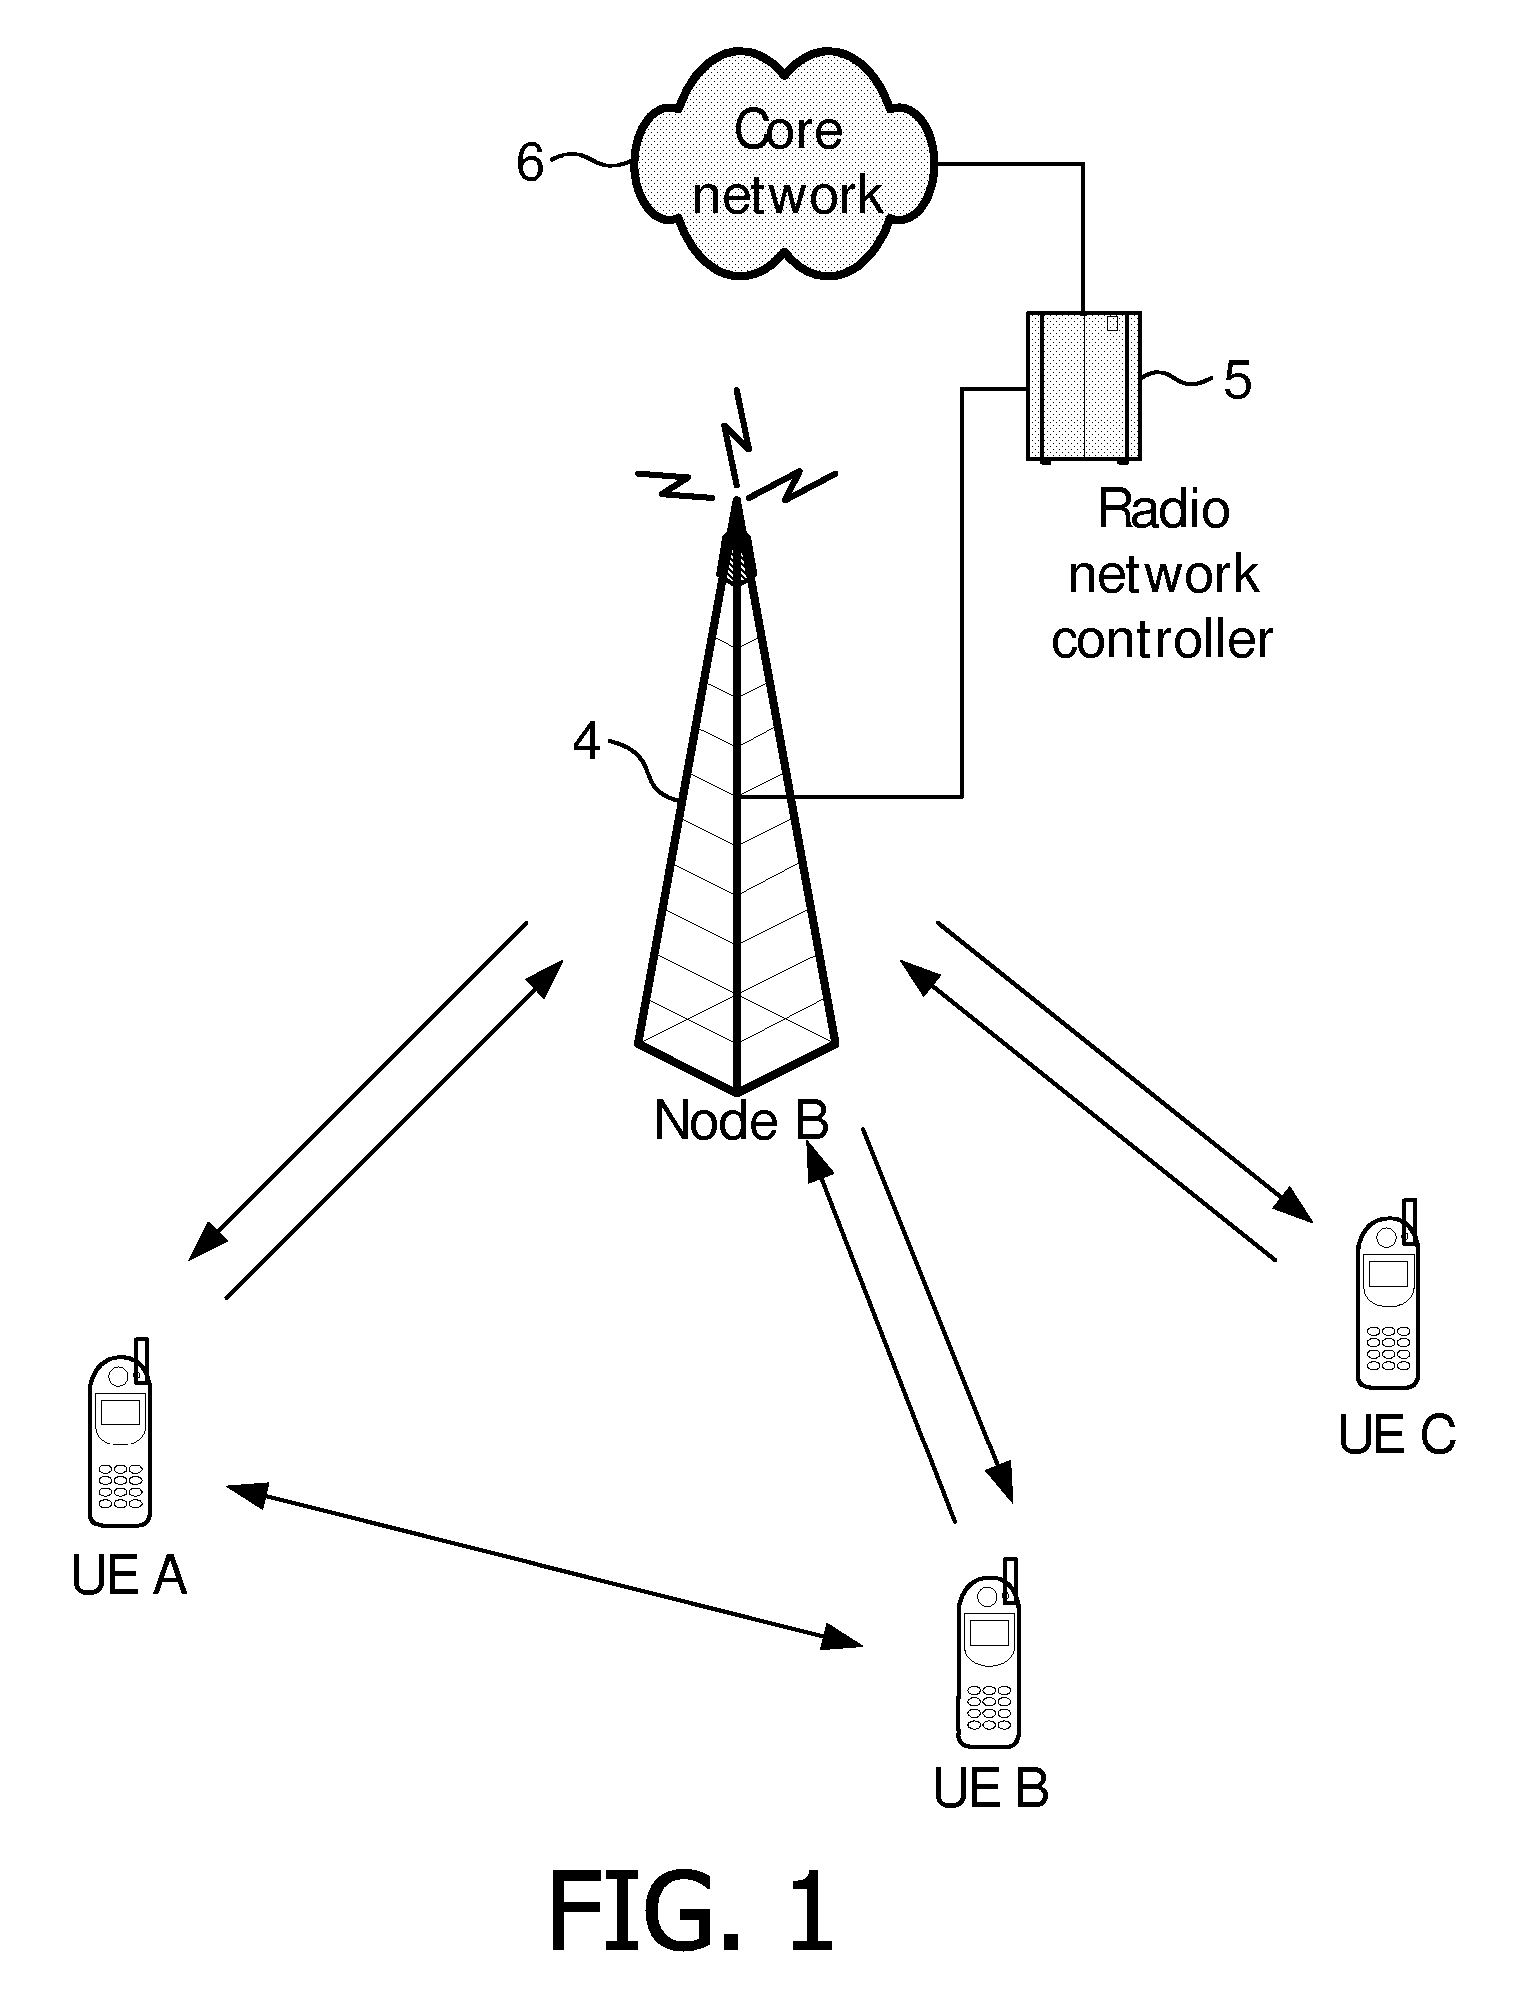 Method and apparatus for peer-to-peer instant messaging